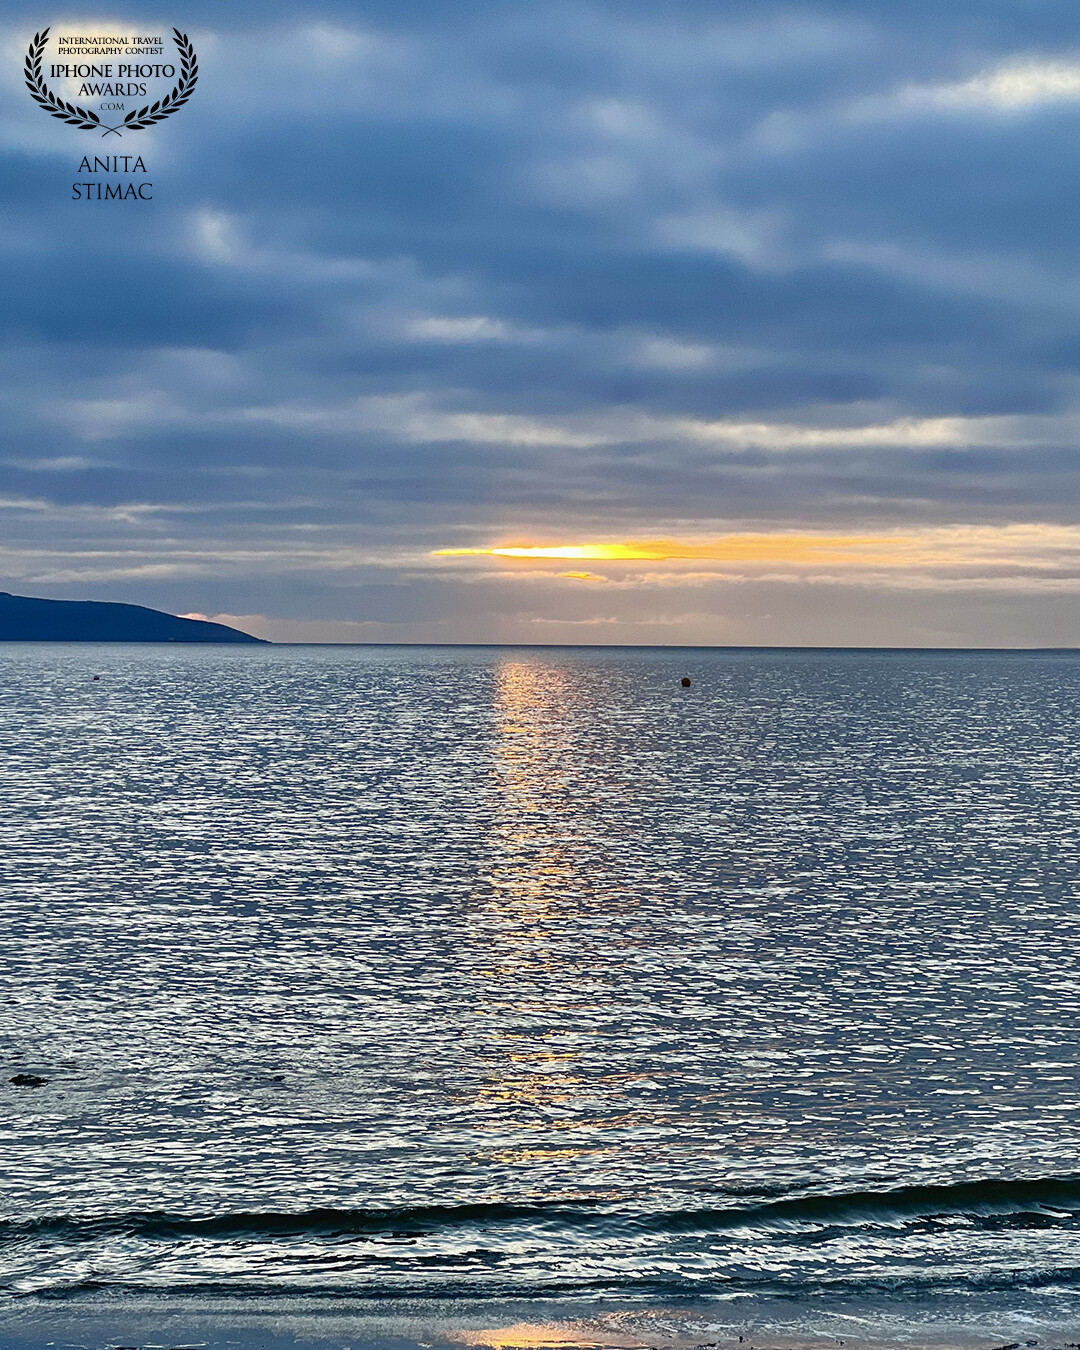 Sunset on Salthill: Blue sea and sky meet the golden glow of the sun. Captured in Galway.